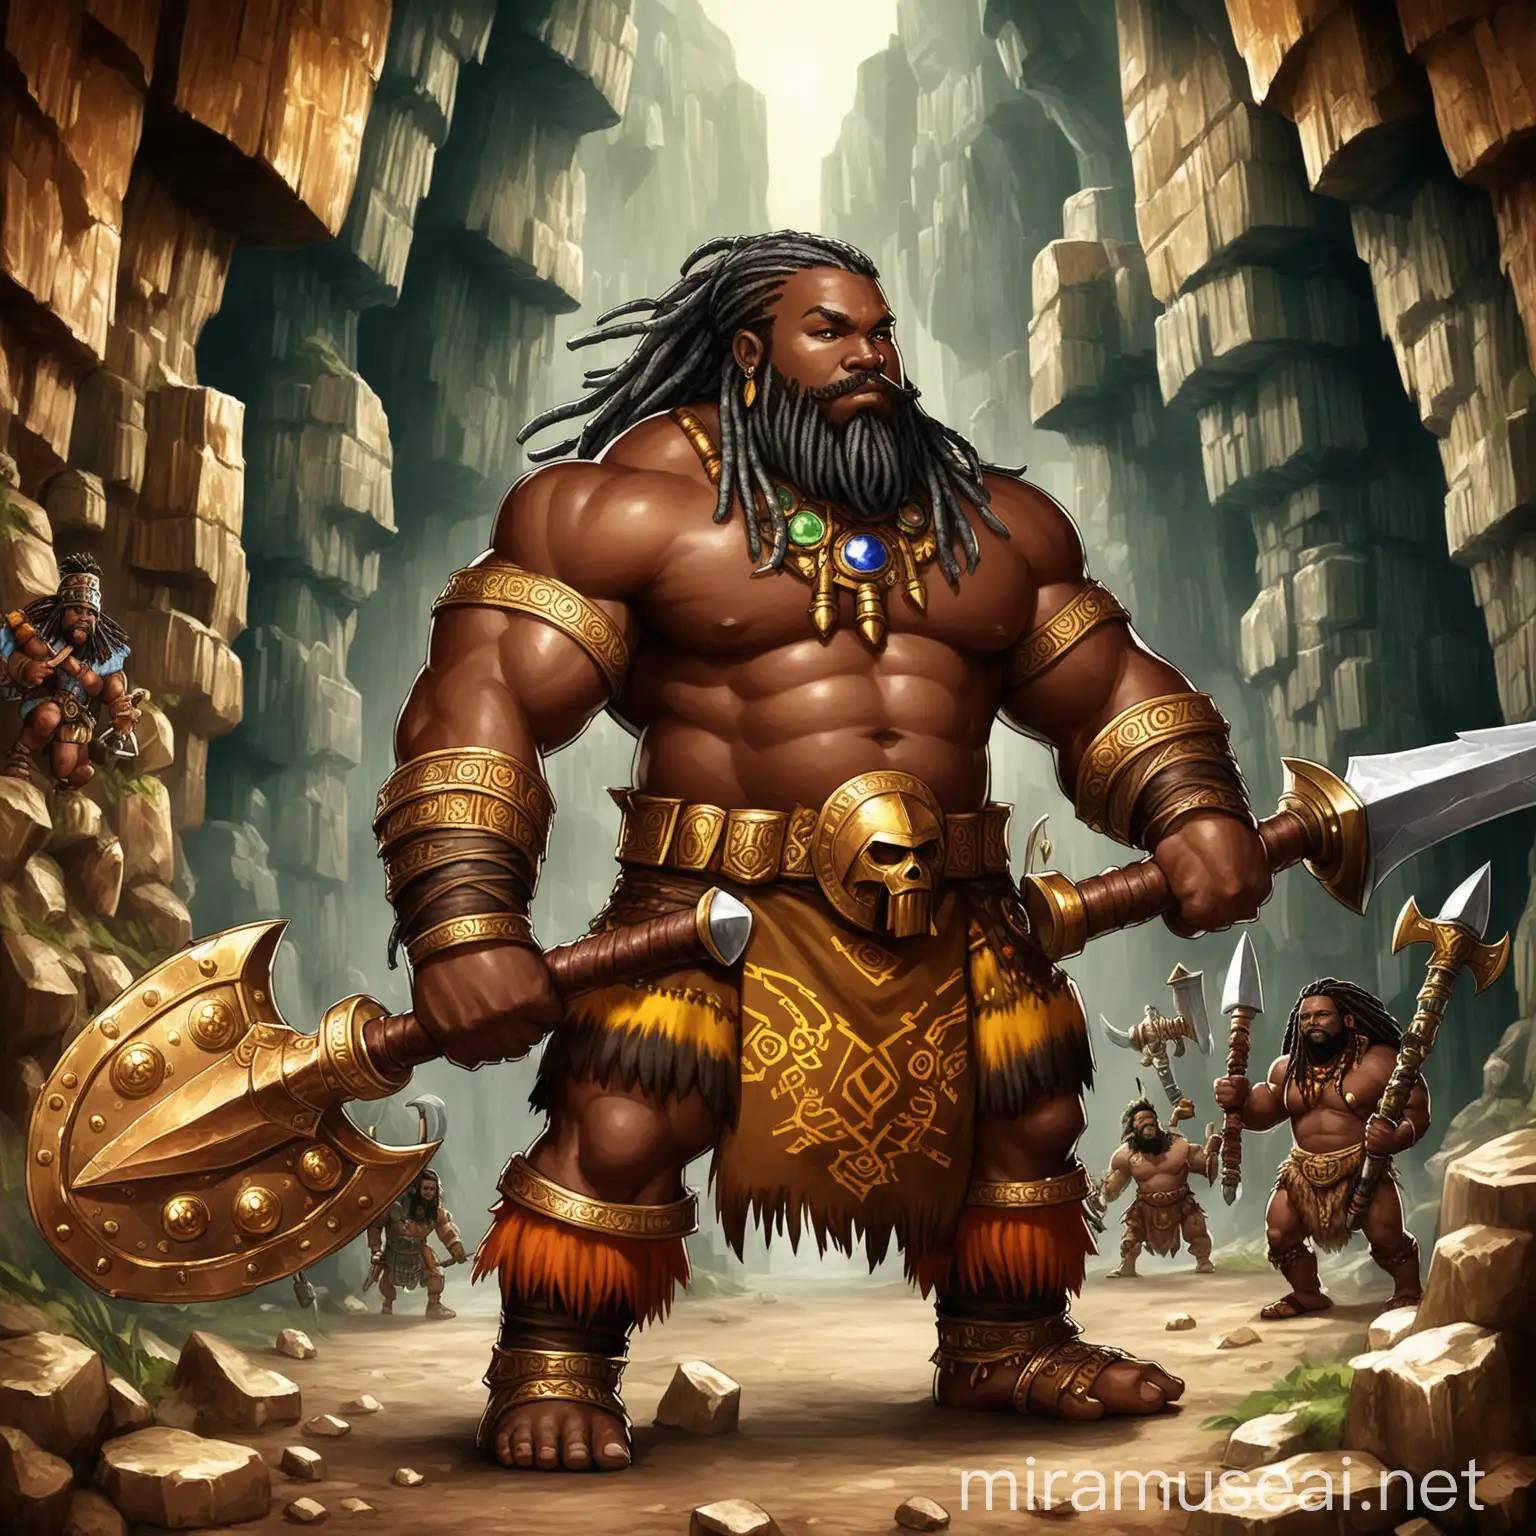 Dwarf Barbarian with West African Features Wielding Warhammer in Precious Metal Caverns